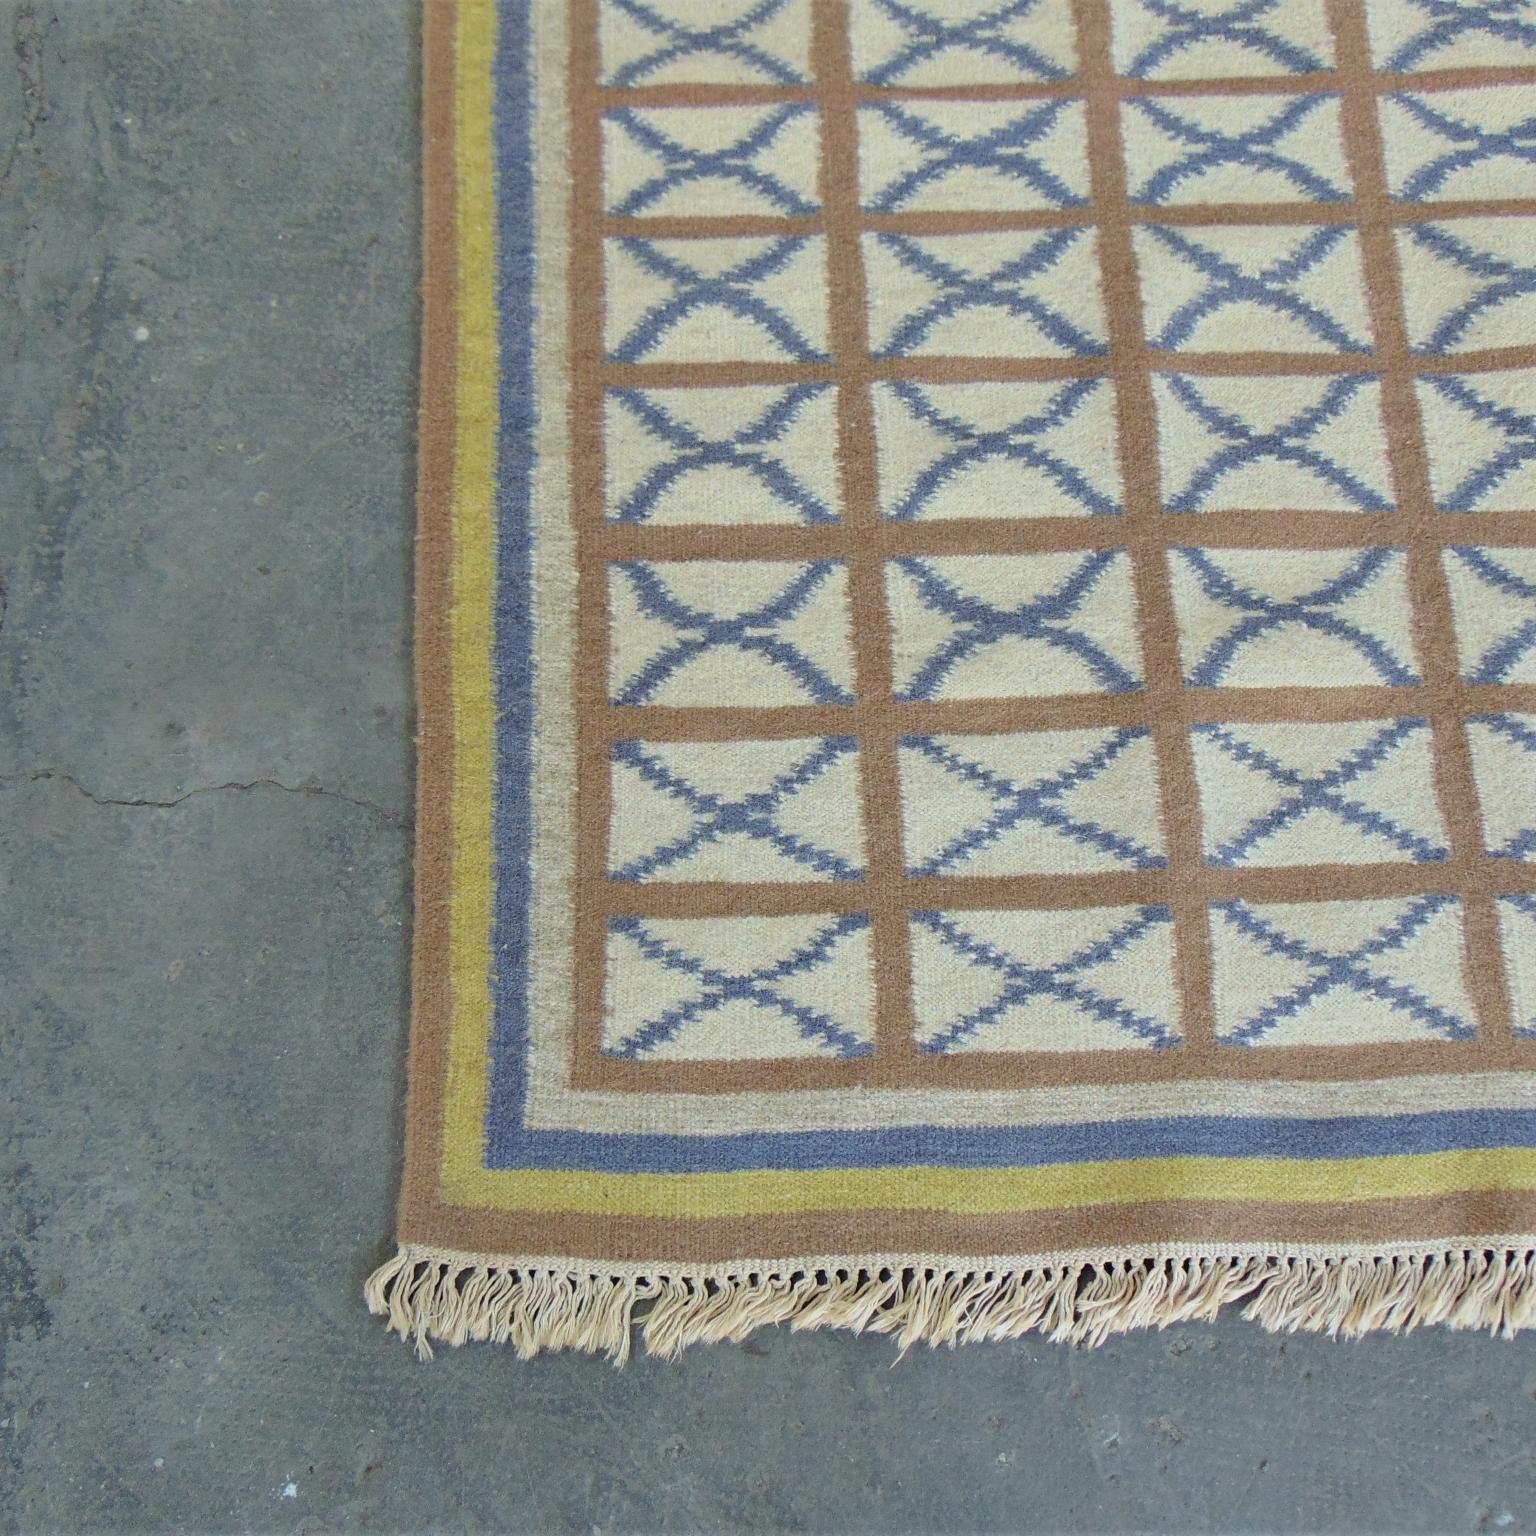 Hand-Woven 1975 Handwoven Kilim Vintage Indian Rug Blue Brown Yellow Ivory Background India For Sale